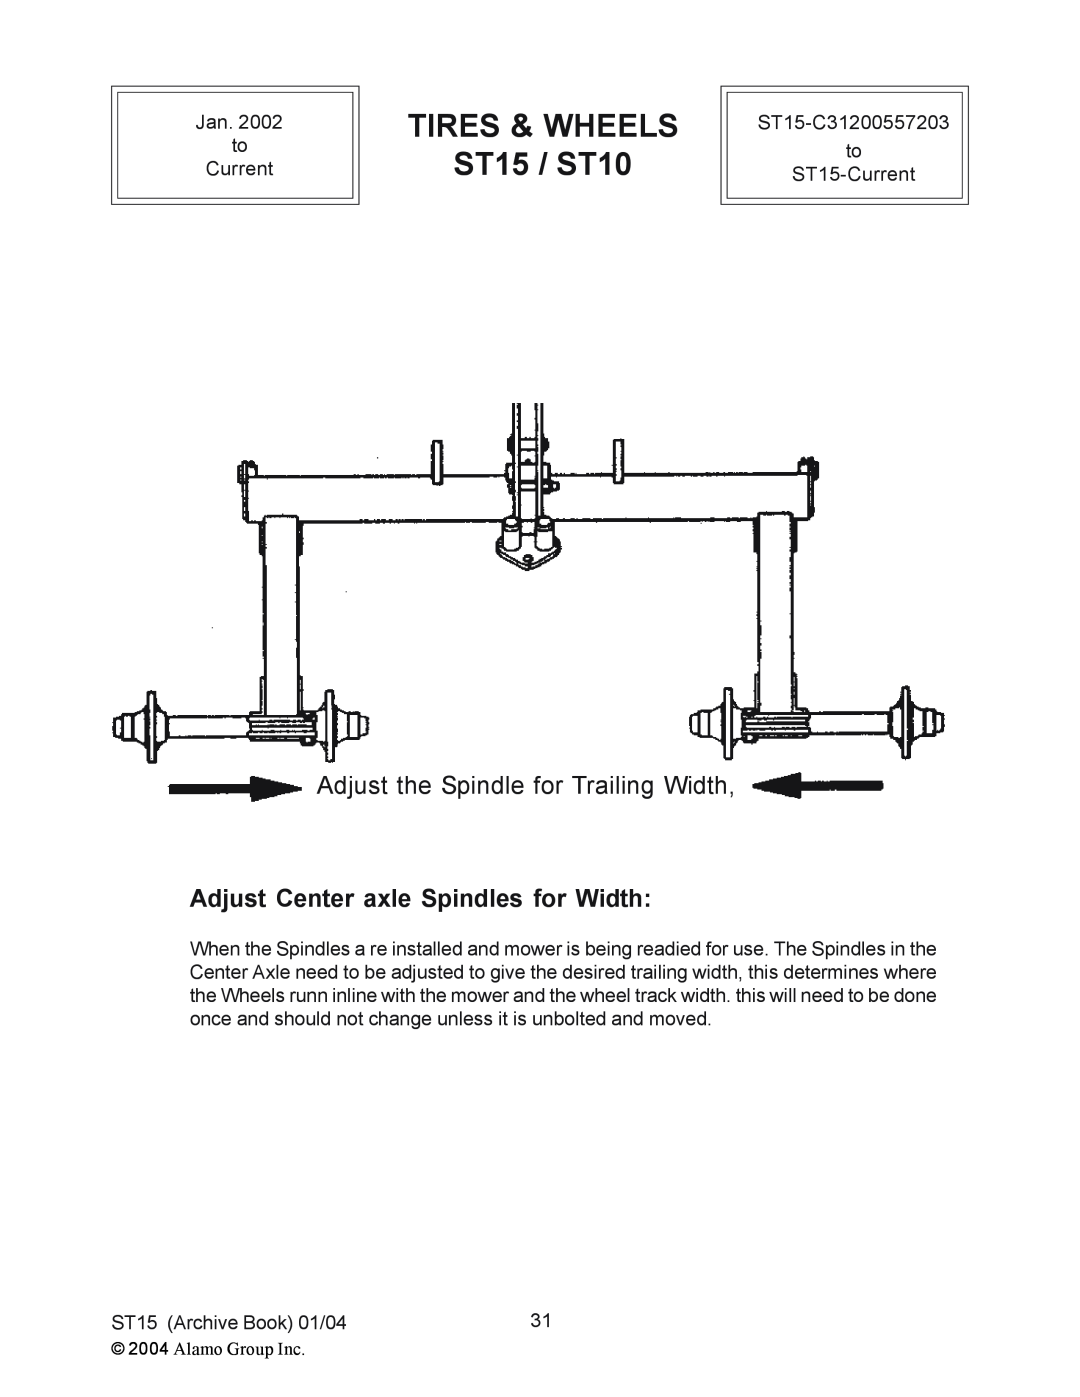 Alamo manual Adjust Center axle Spindles for Width, TIRES & WHEELS ST15 / ST10, Adjust the Spindle for Trailing Width 